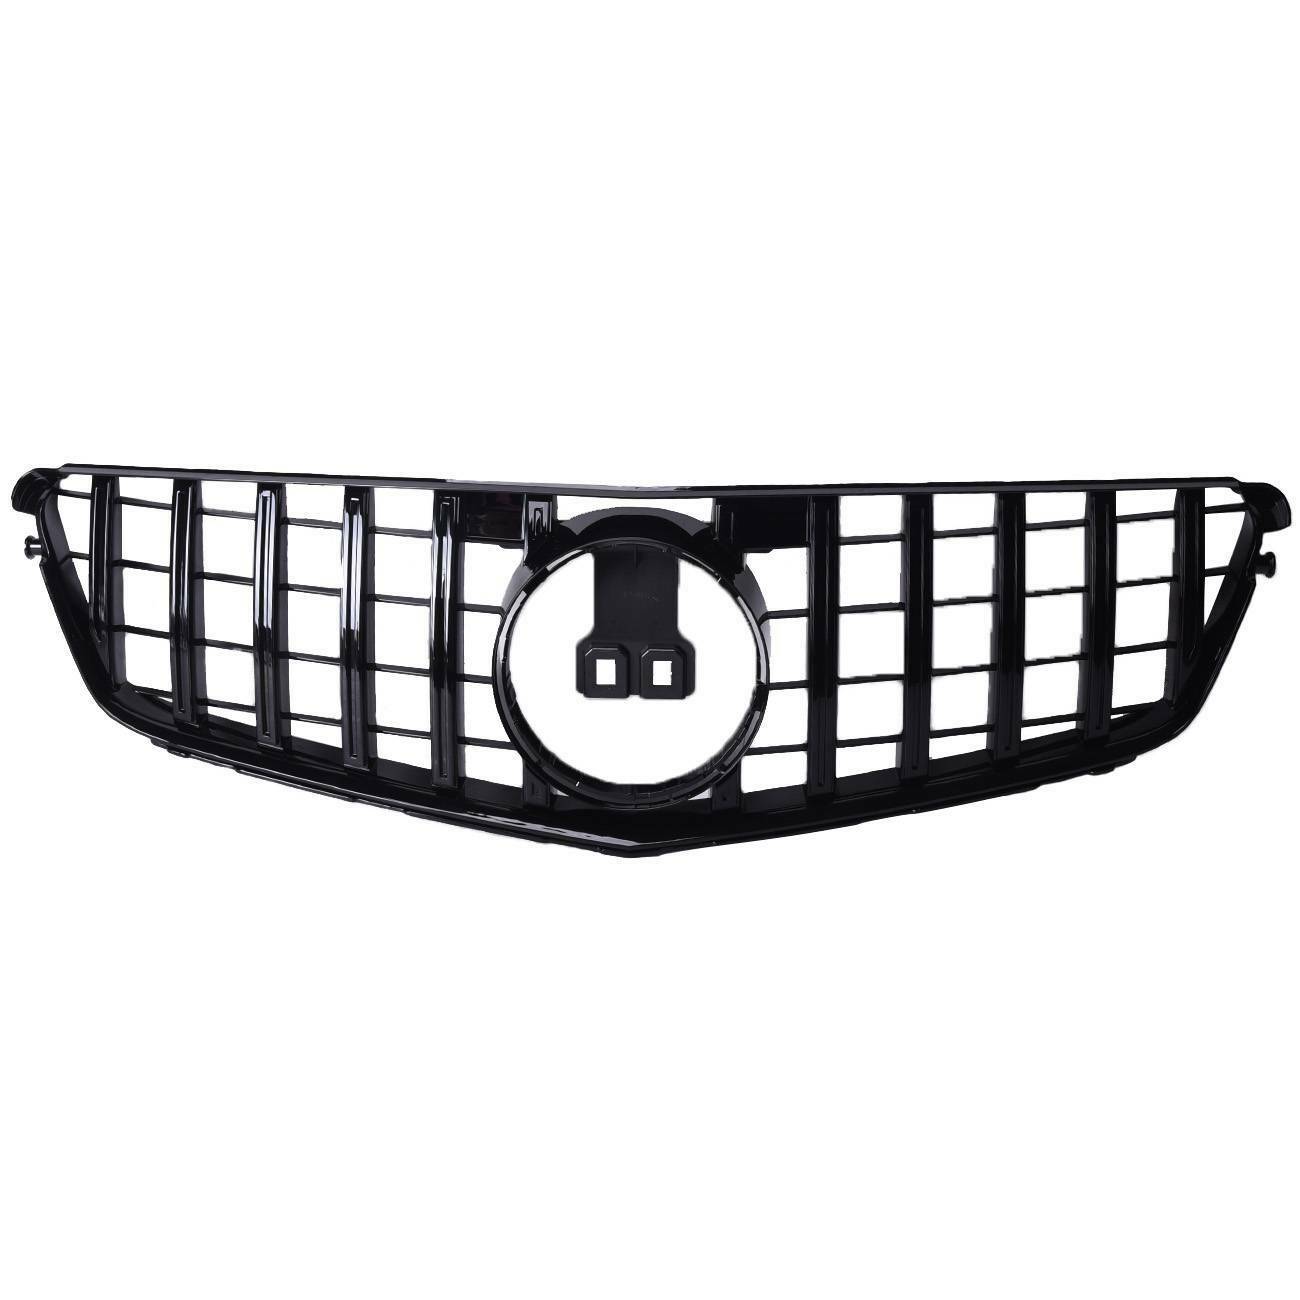 Front Mesh Grille Chrome for 2007-2014 Mercedes W204 S204 C180 C220 C250 German Made